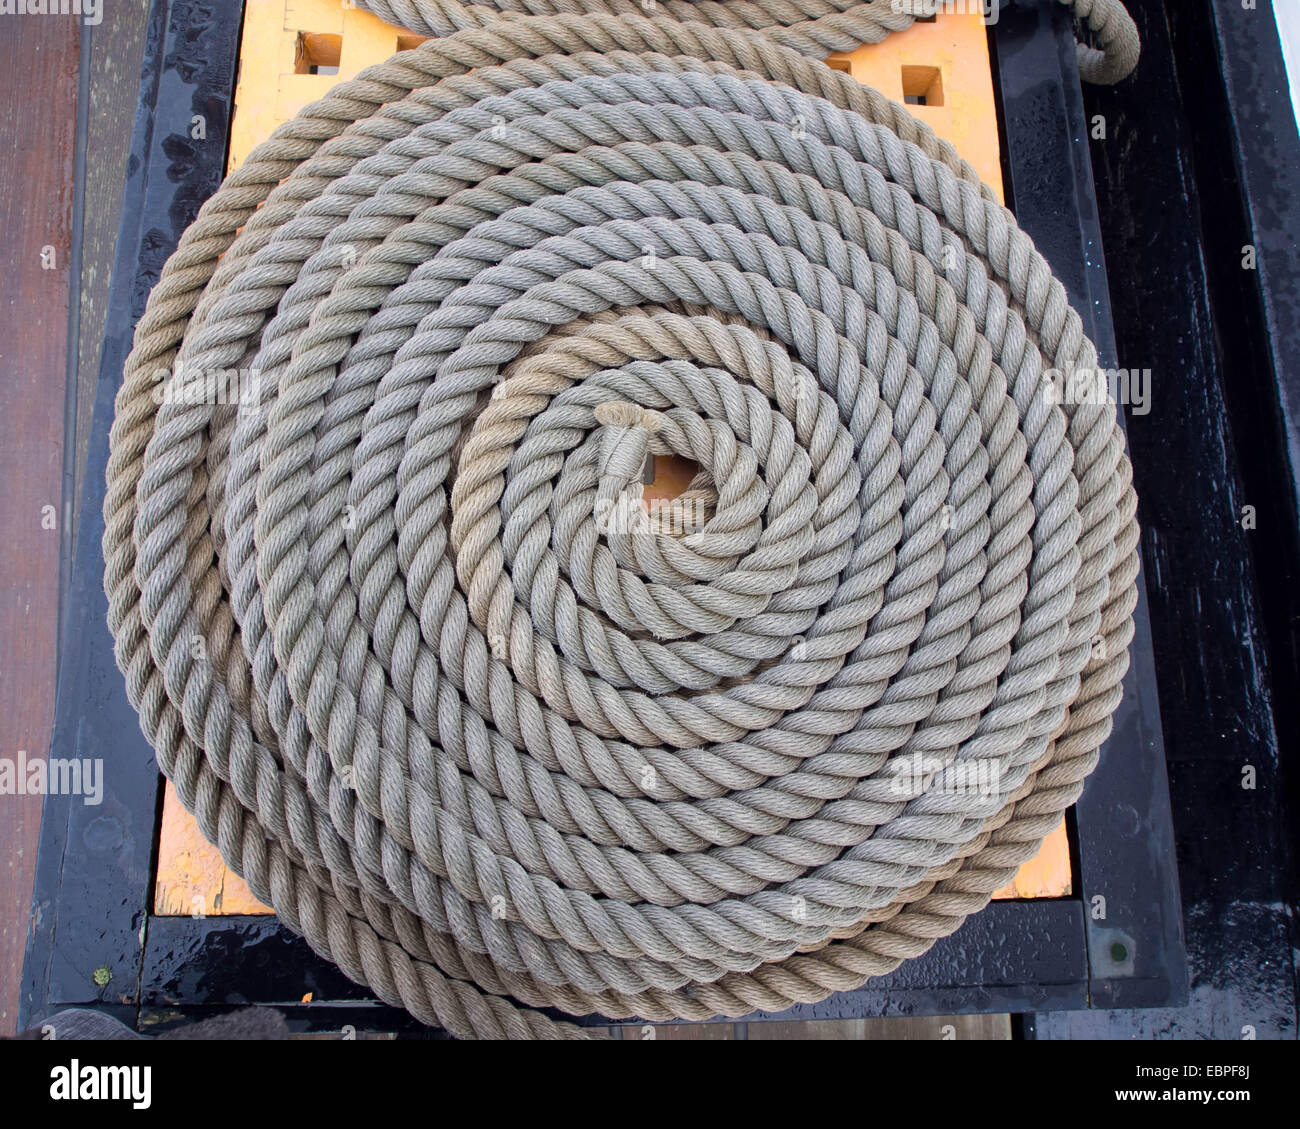 A coiled down length of natural fibre rope Stock Photo